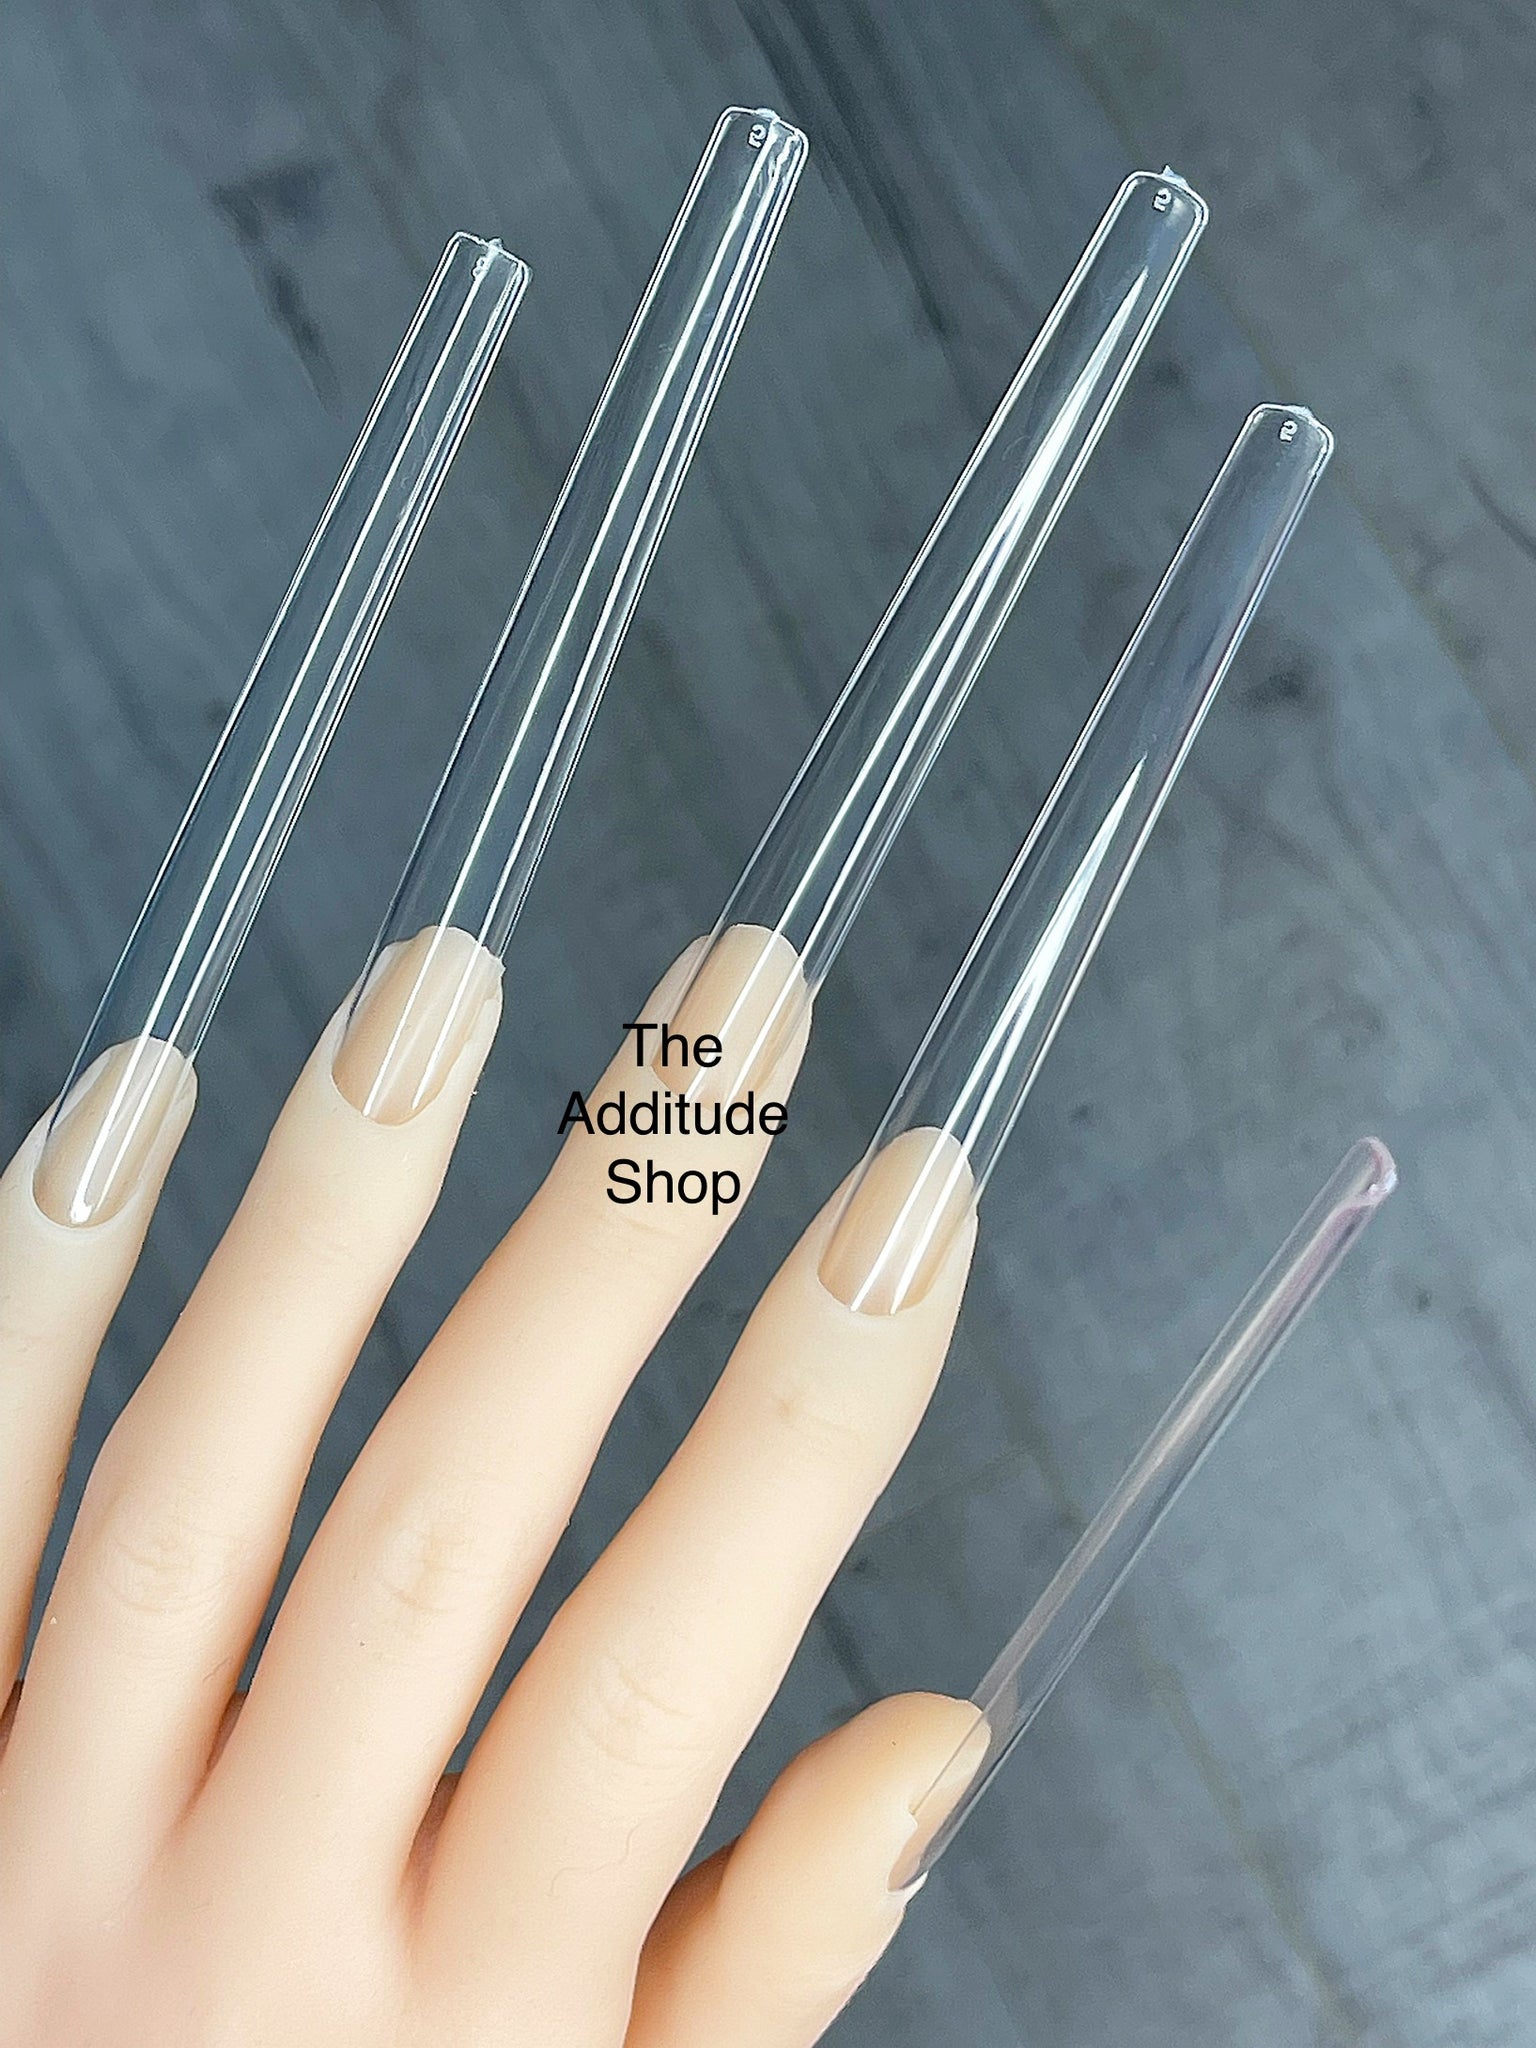 Babe | Extra Long Tapered Square Pink Nails